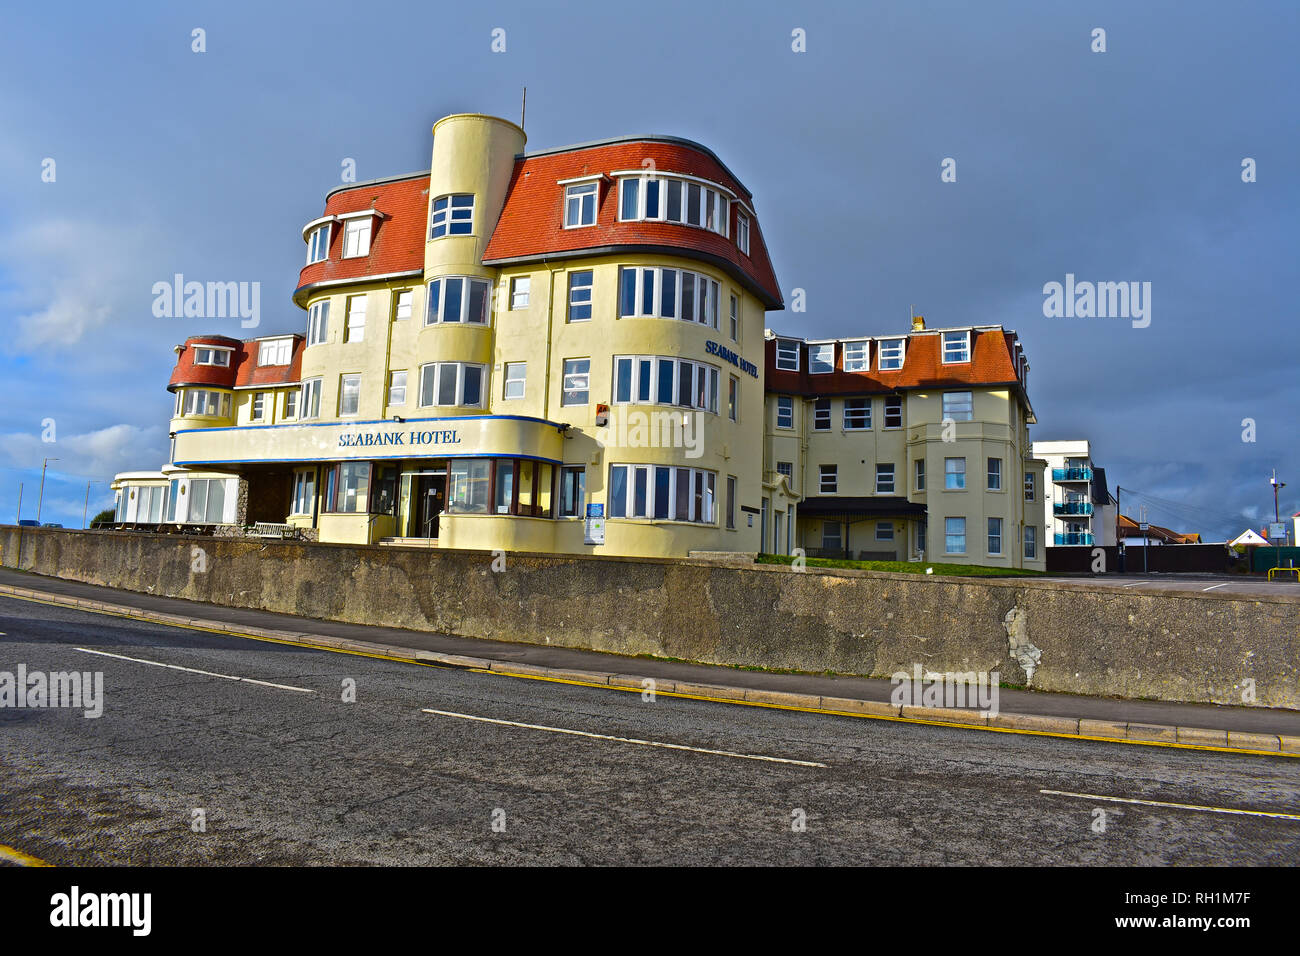 The Seabank Hotel is a historic hotel occupying a stunning location on the Esplanade overlooking the Bristol Channel / sea.Porthcawl S.Wales Stock Photo